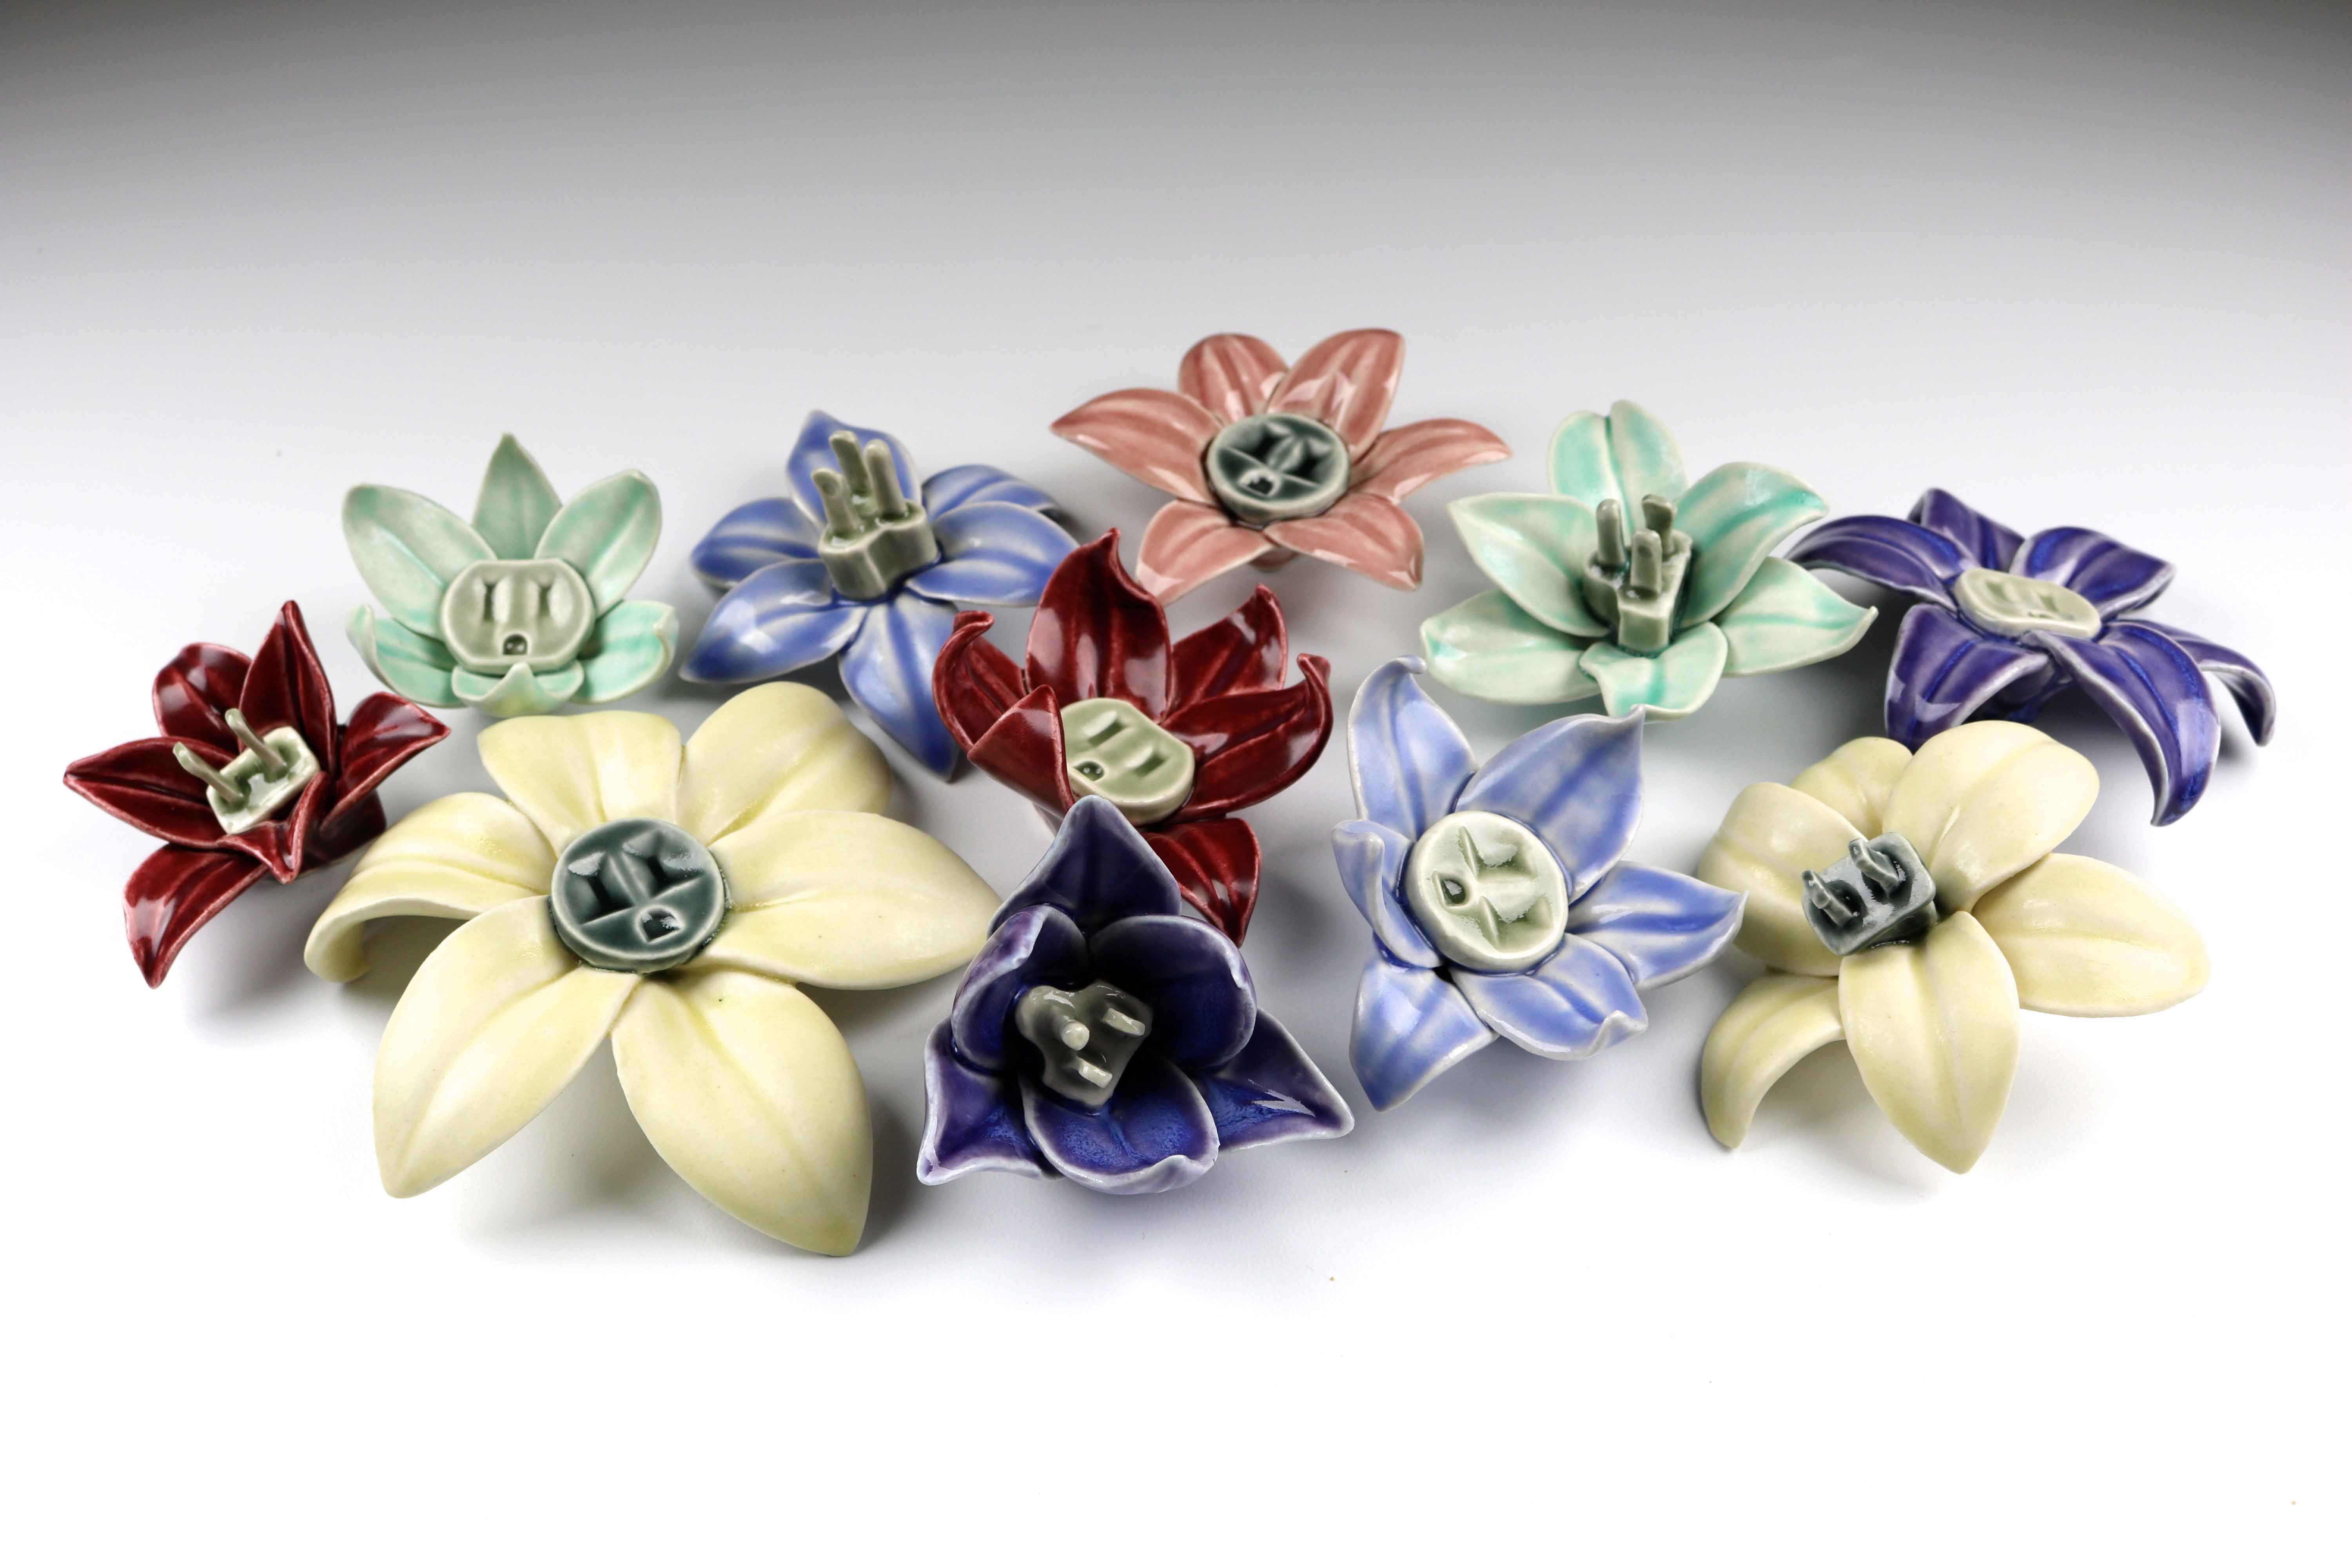 Flower Power by Julie K. Anderson (2017) multi-part porcelain sculpture, hand-built and press-molded with Cone 6 oxidation glazes; approx. 3x3x1.5 in. ea.  